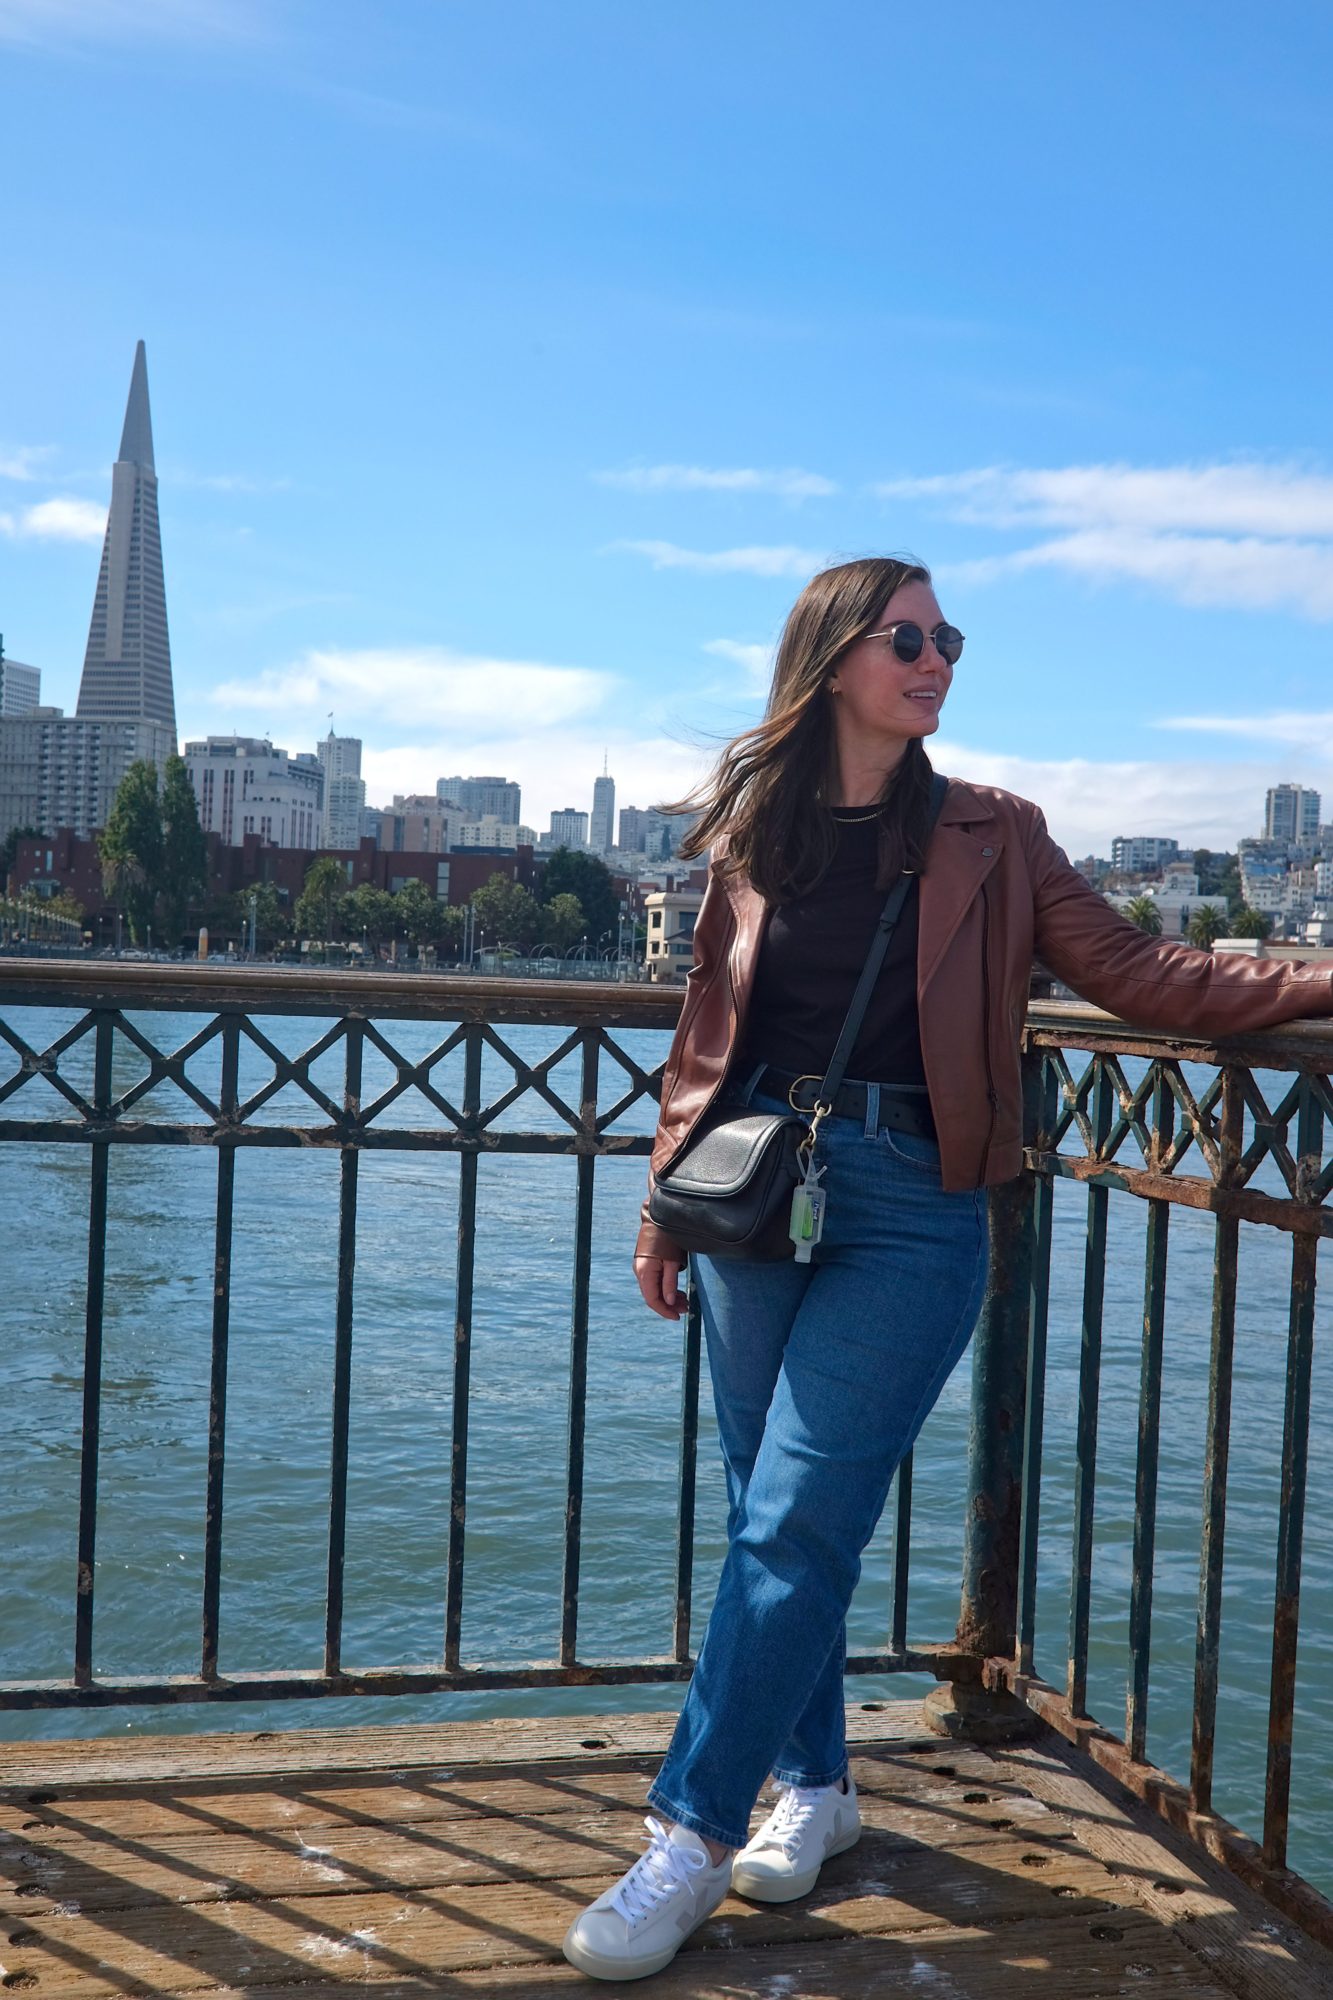 Alyssa looks away from the camera while wearing a black top, brown jacket, blue jeans, and sneakers. San Francisco is in the background